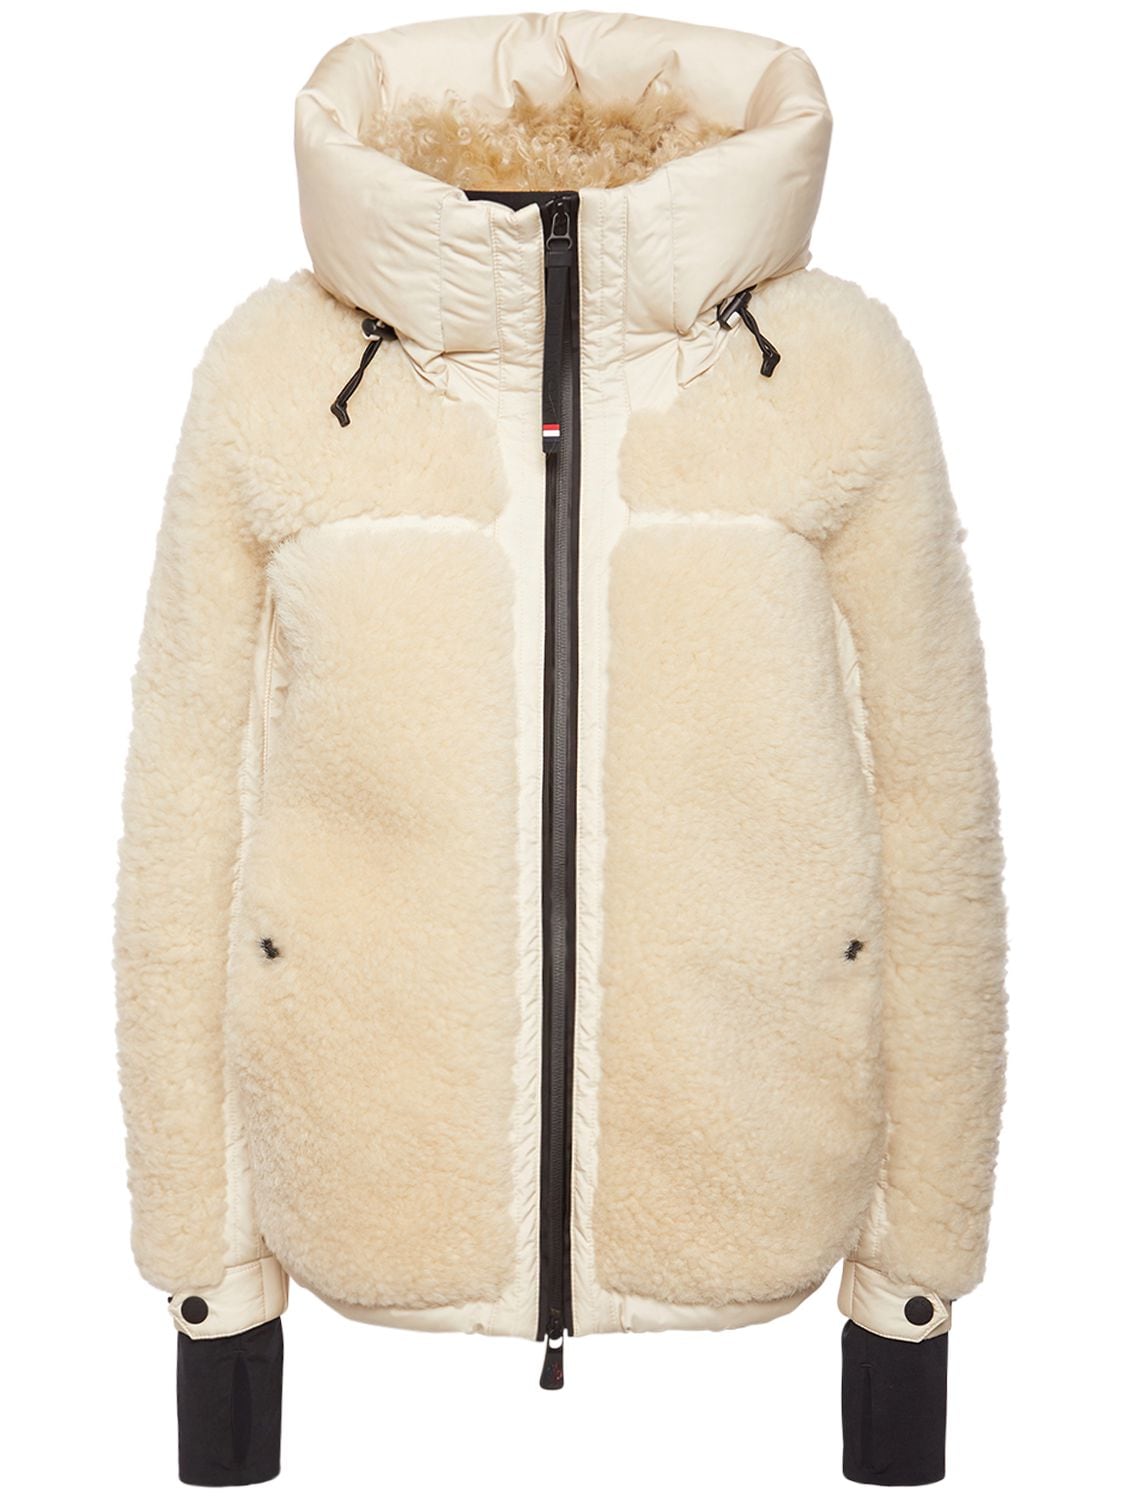 Moncler Women's Epicea Shearling Down Bomber Jacket In Cream